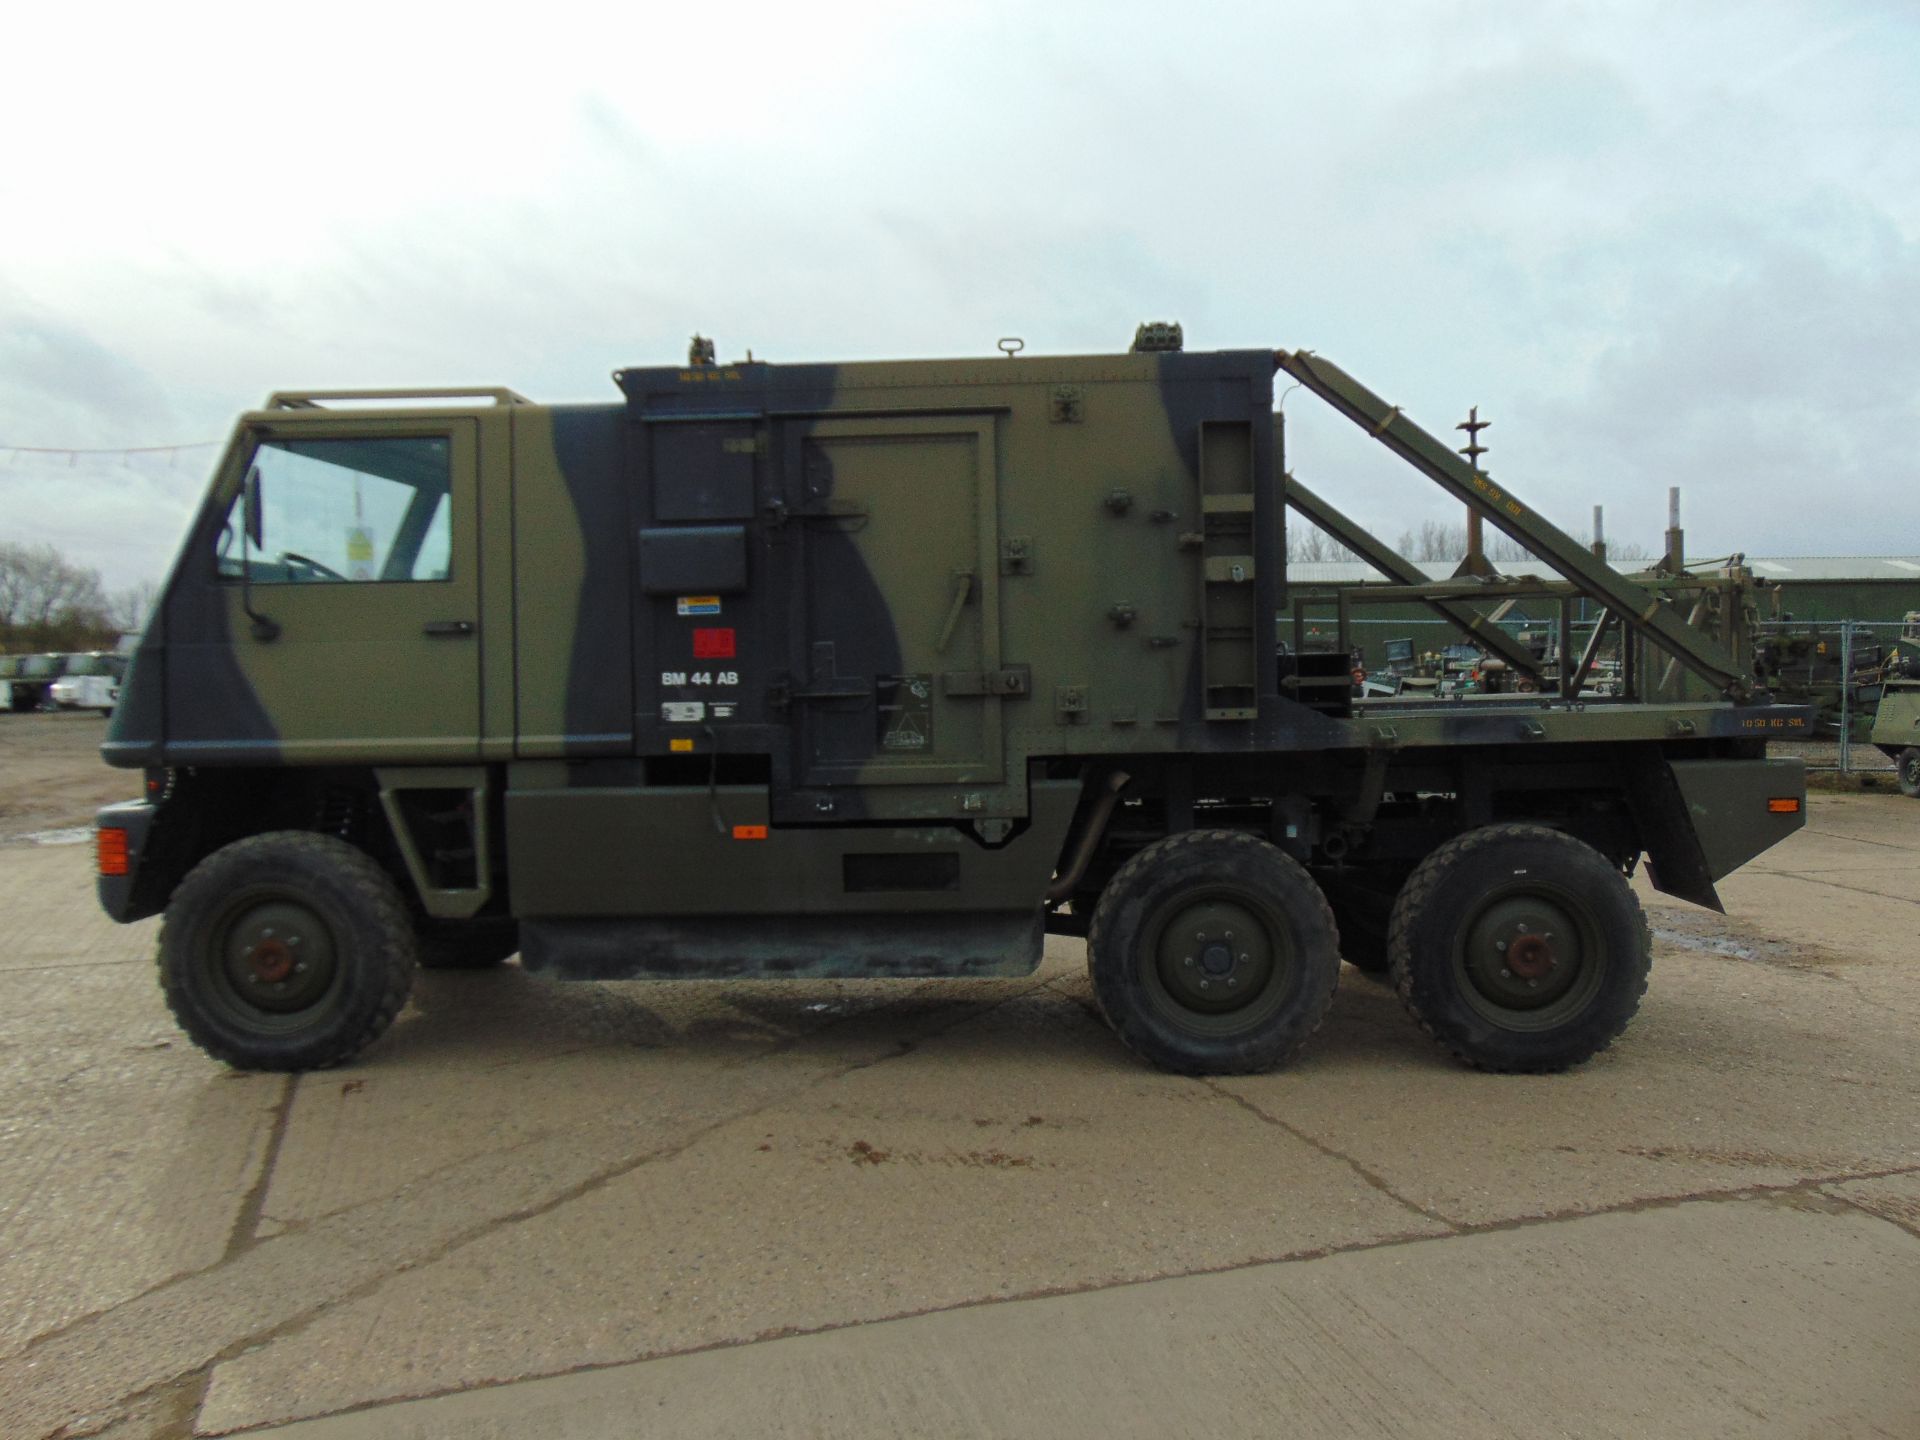 Ex Reserve Left Hand Drive Mowag Bucher Duro II 6x6 High-Mobility Tactical Vehicle - Image 4 of 16